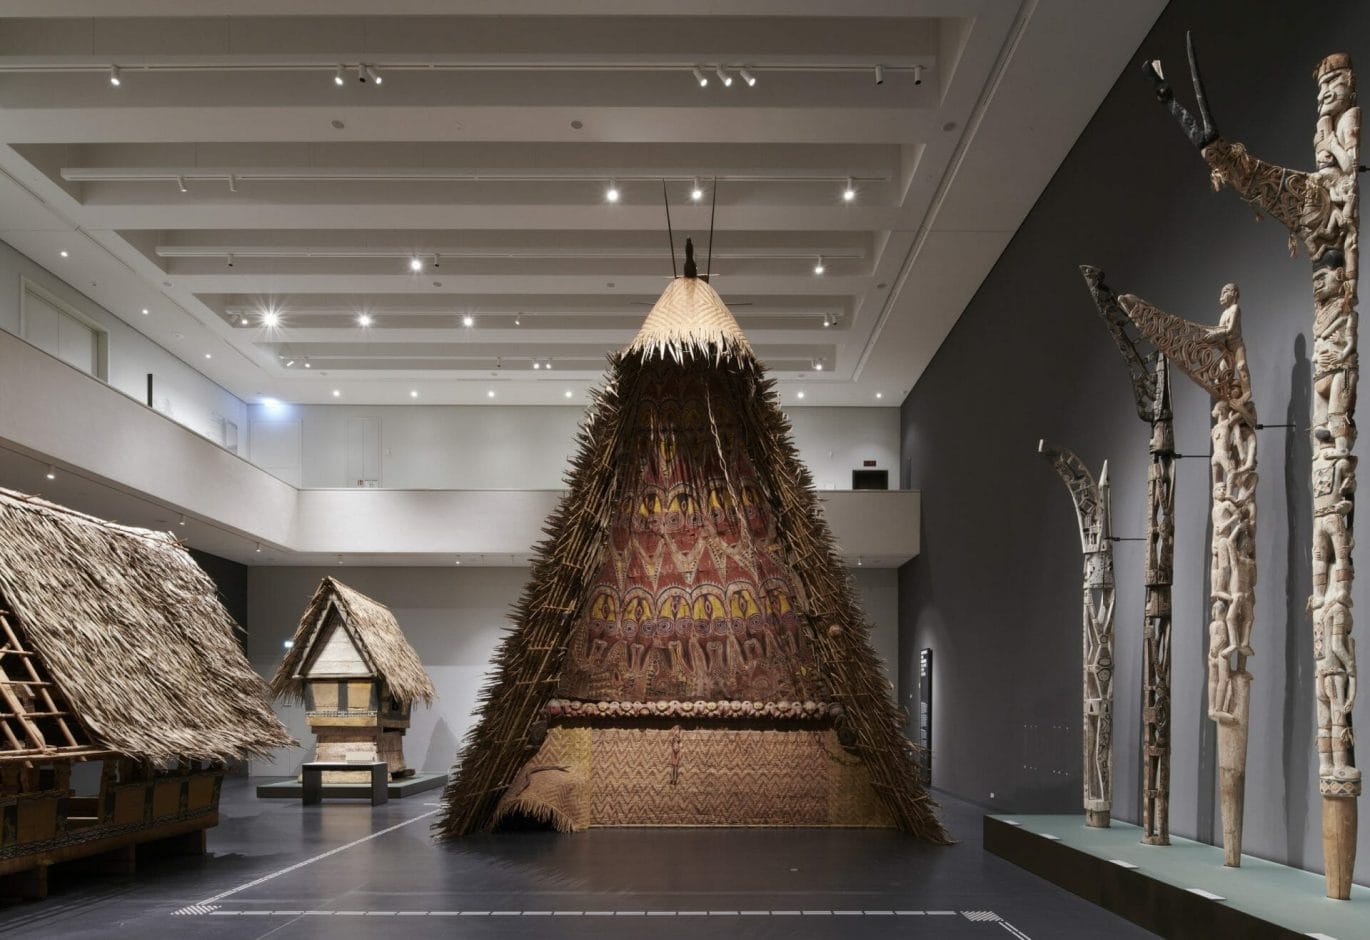 The meeting house (Bai) of the Ethnological Museum was re-roofed by a Palauan team at the Humboldt Forum © SPK / photothek / Thomas Köhler